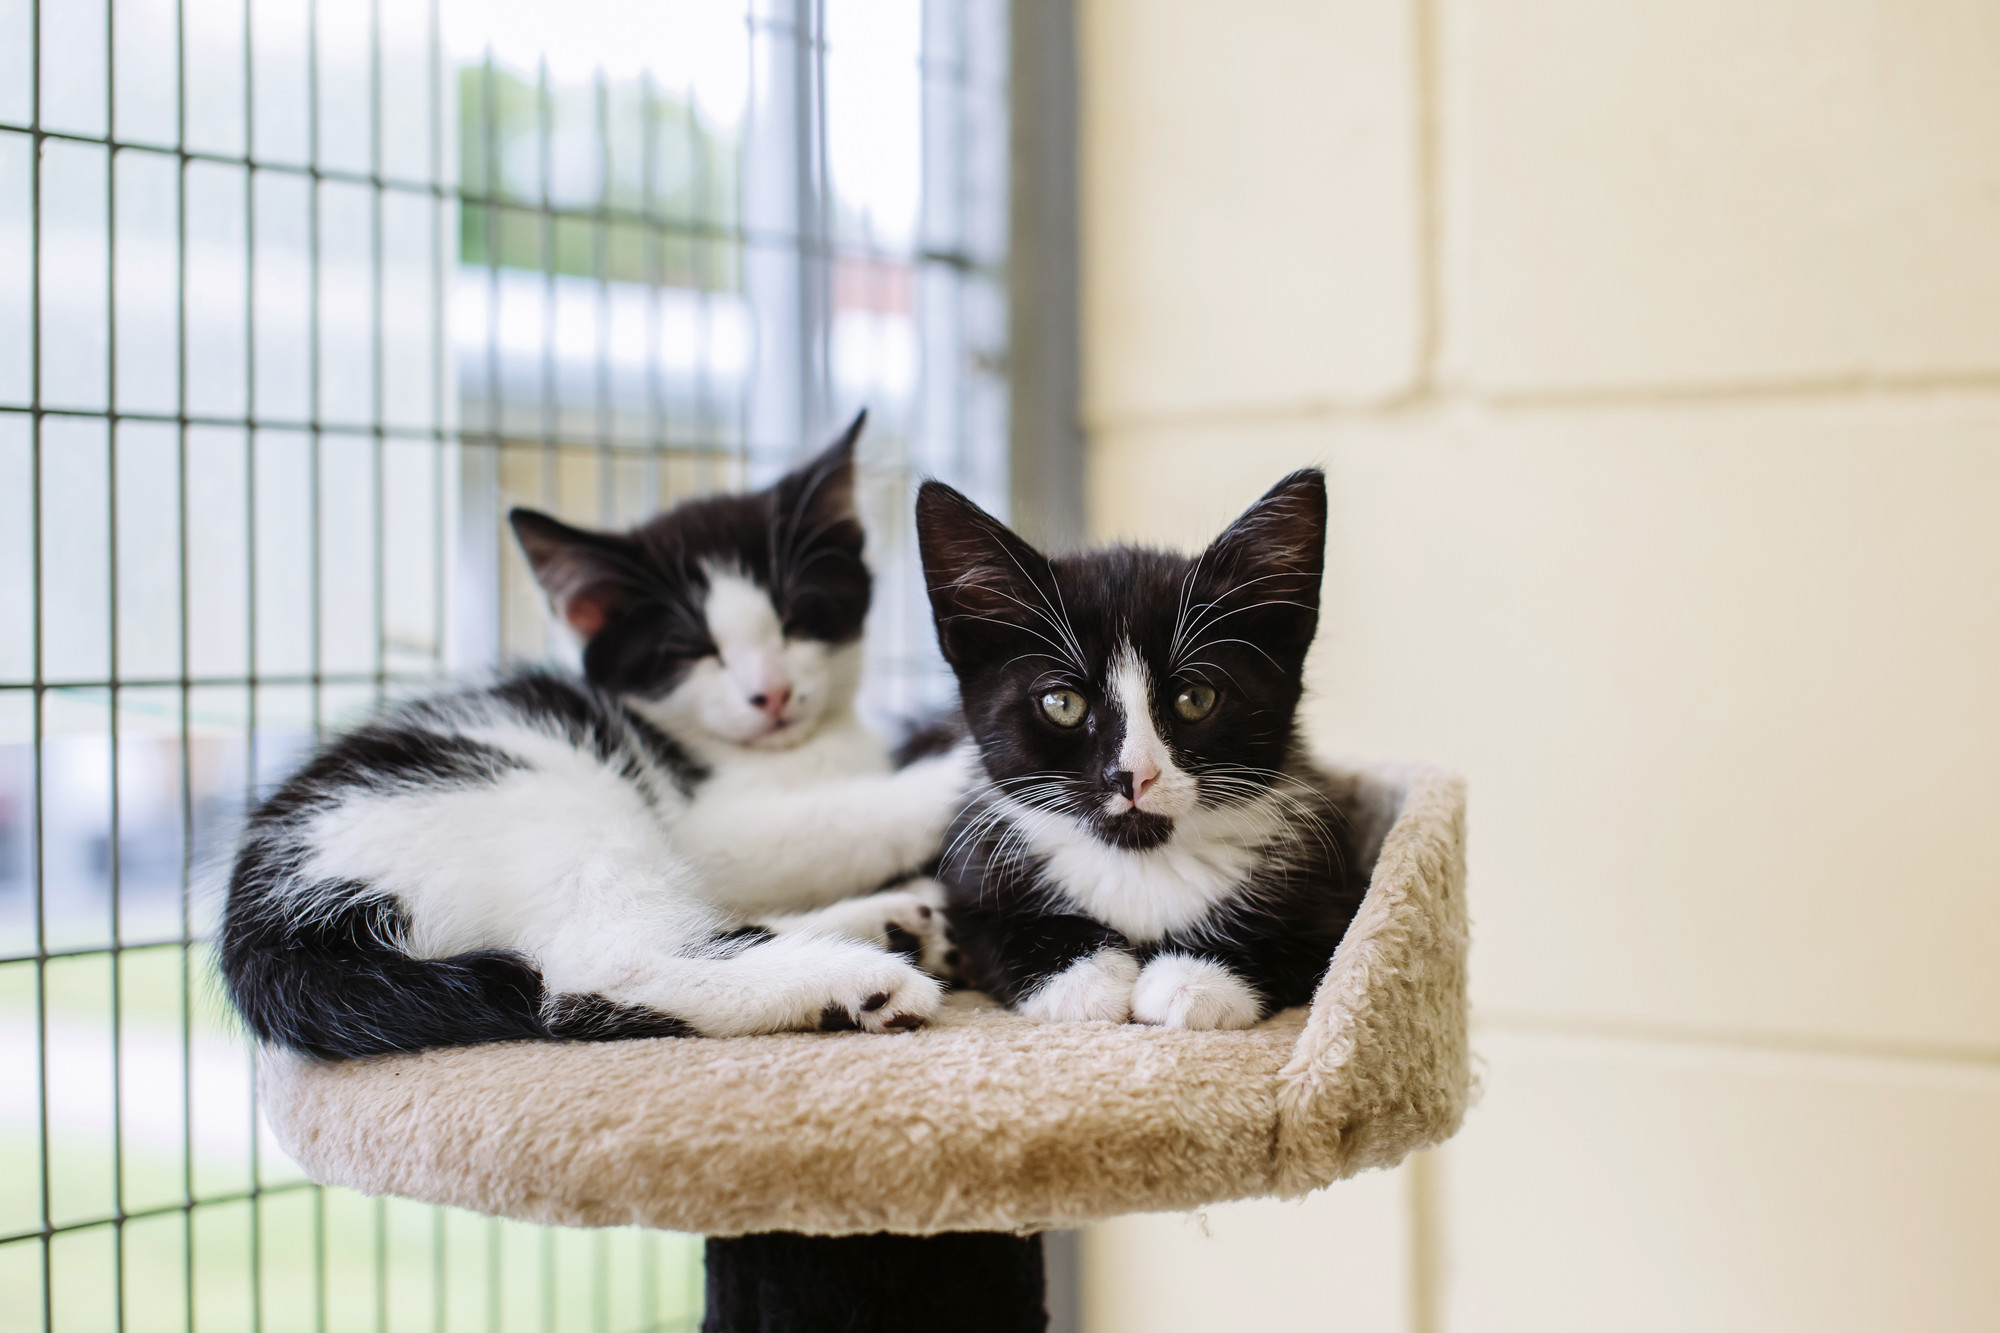 Two of the kittens sit on a play tower in the cattery